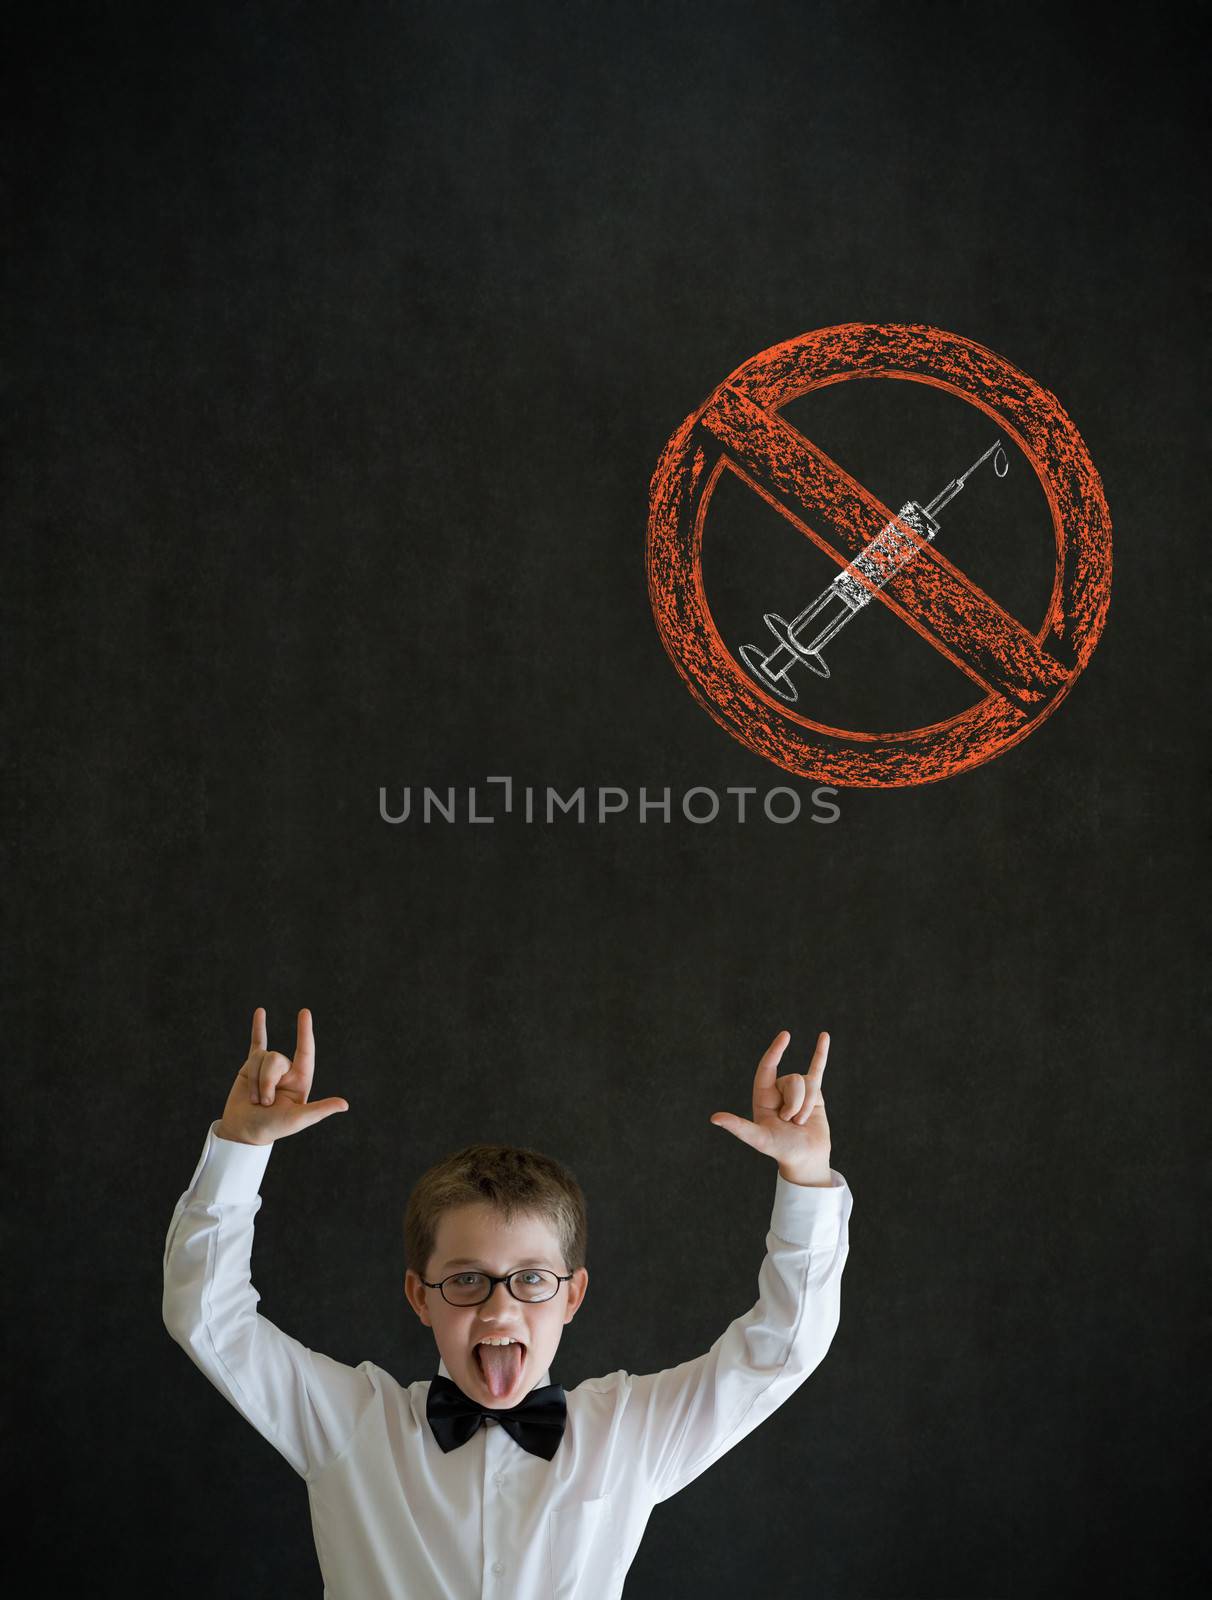 Knowledge rocks boy dressed up as business man with no drugs needle sign on blackboard background